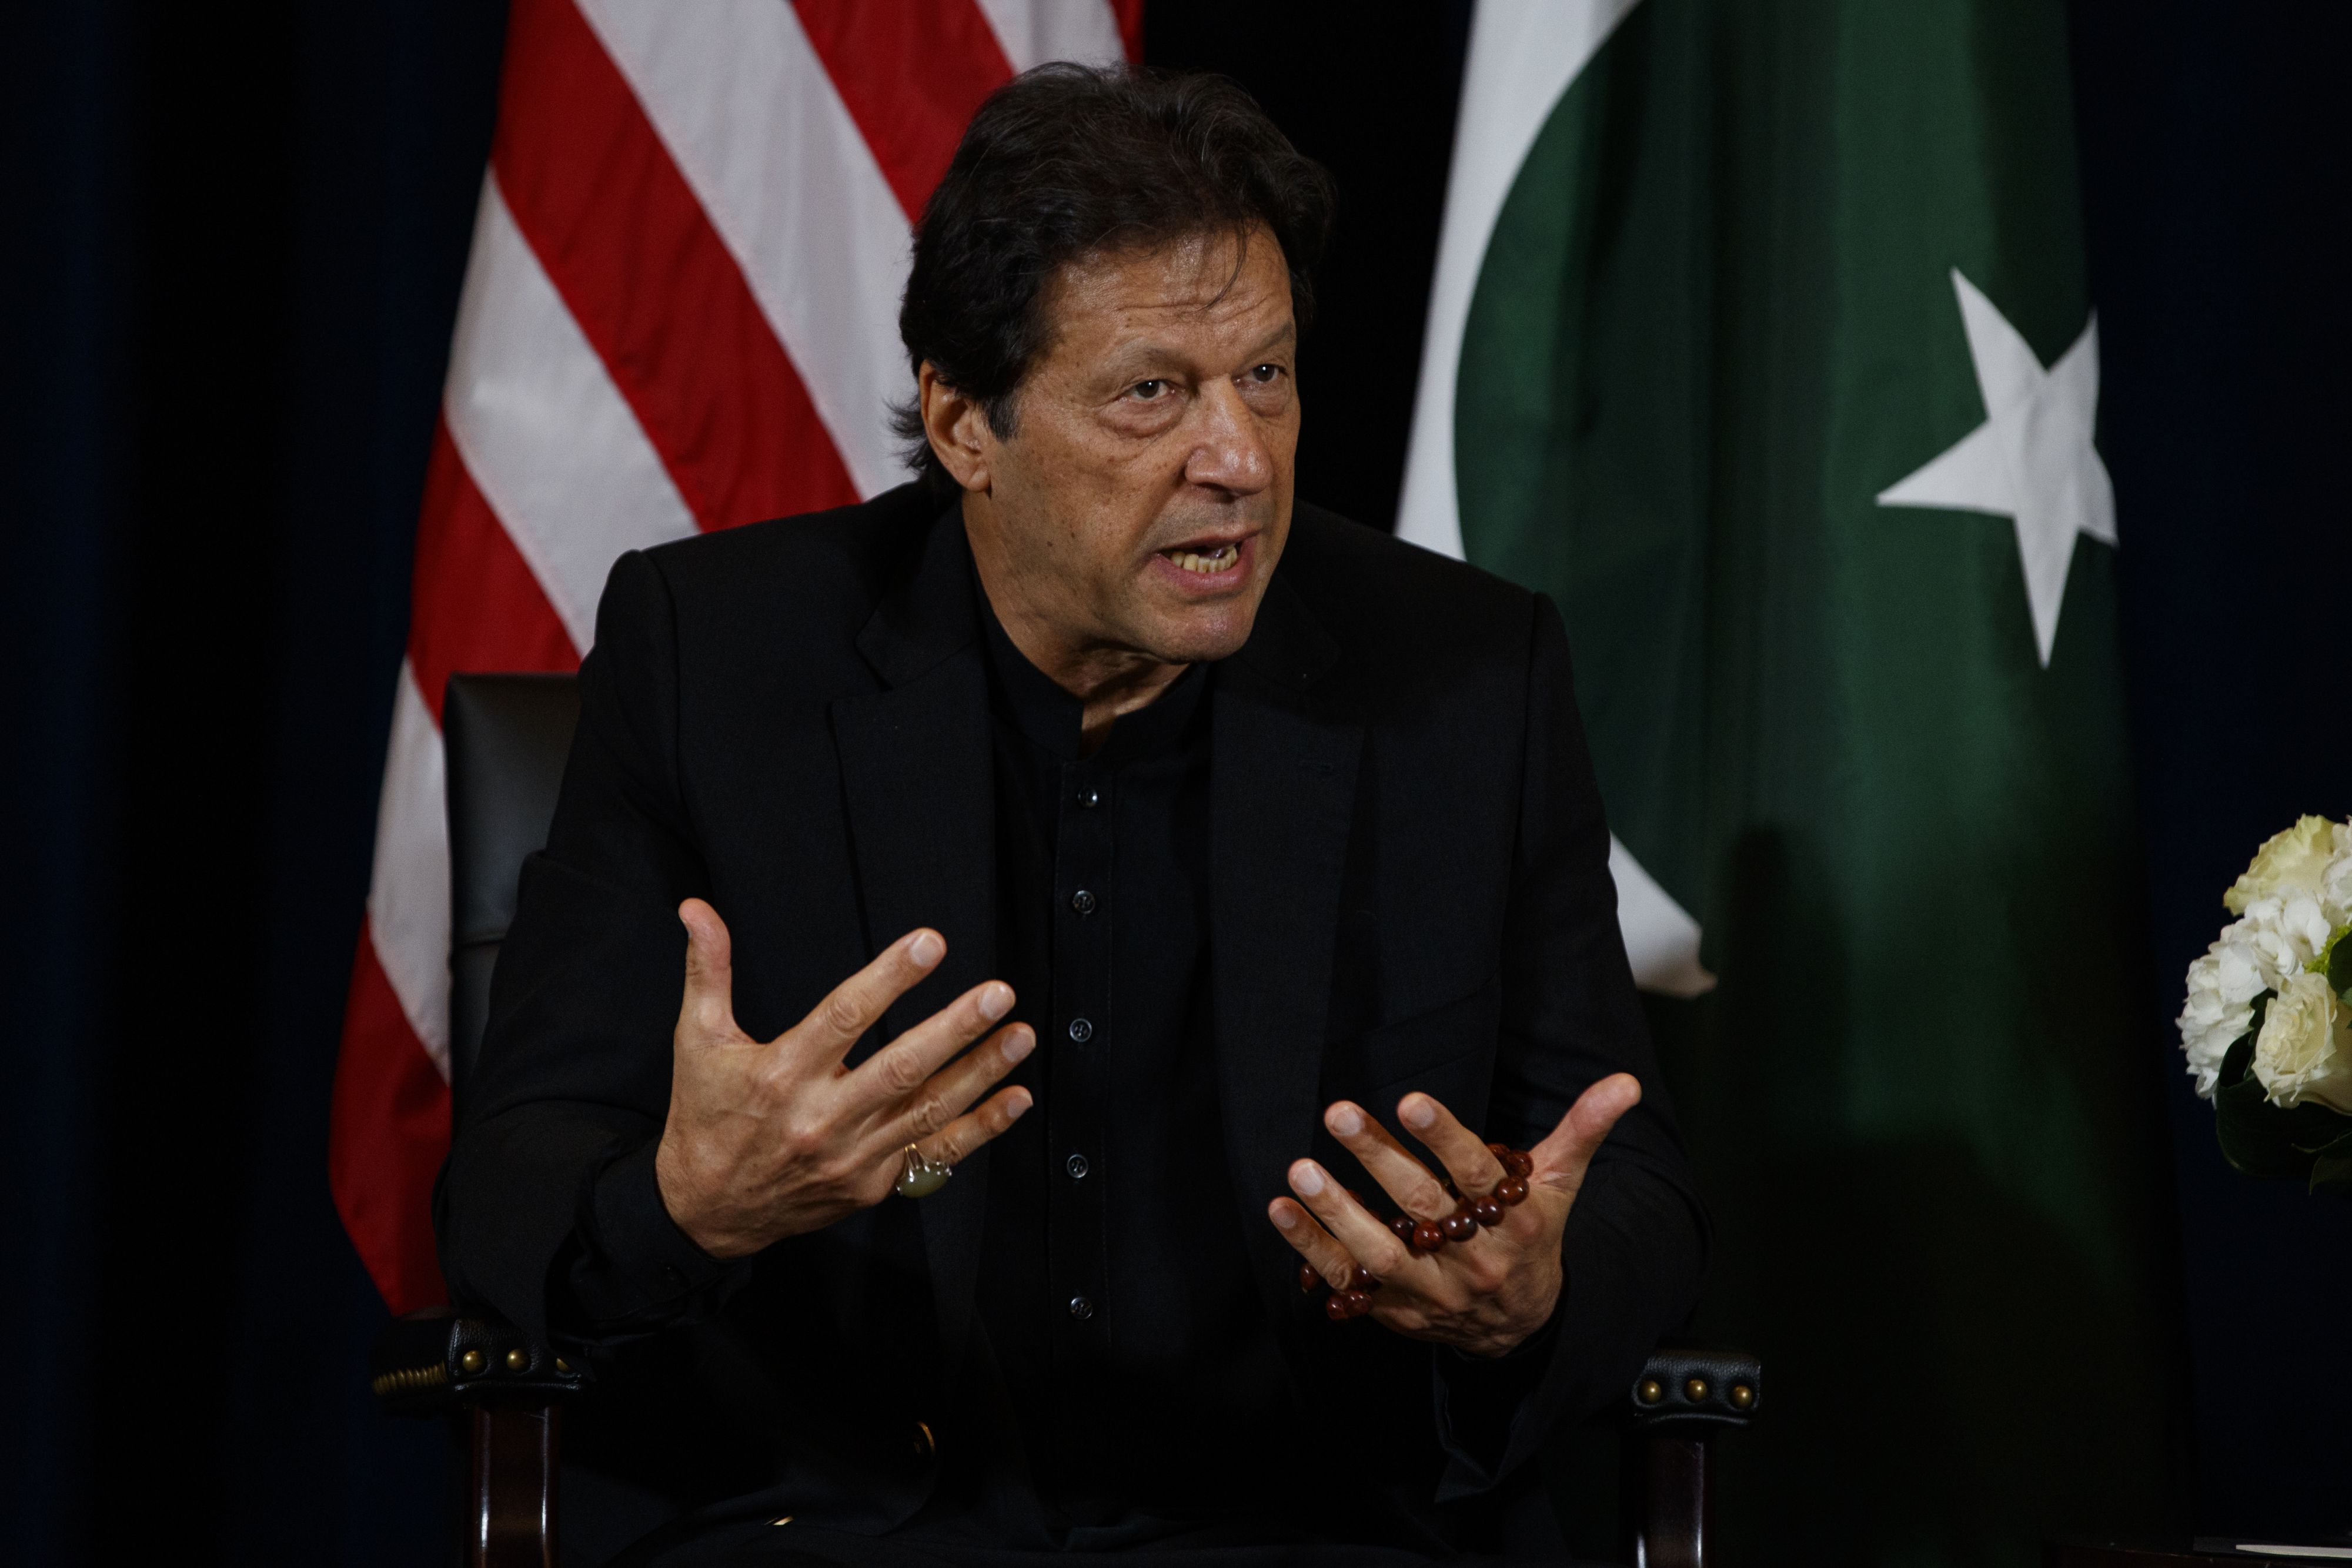 Not meeting FATF obligations would be devastating for Pak: US